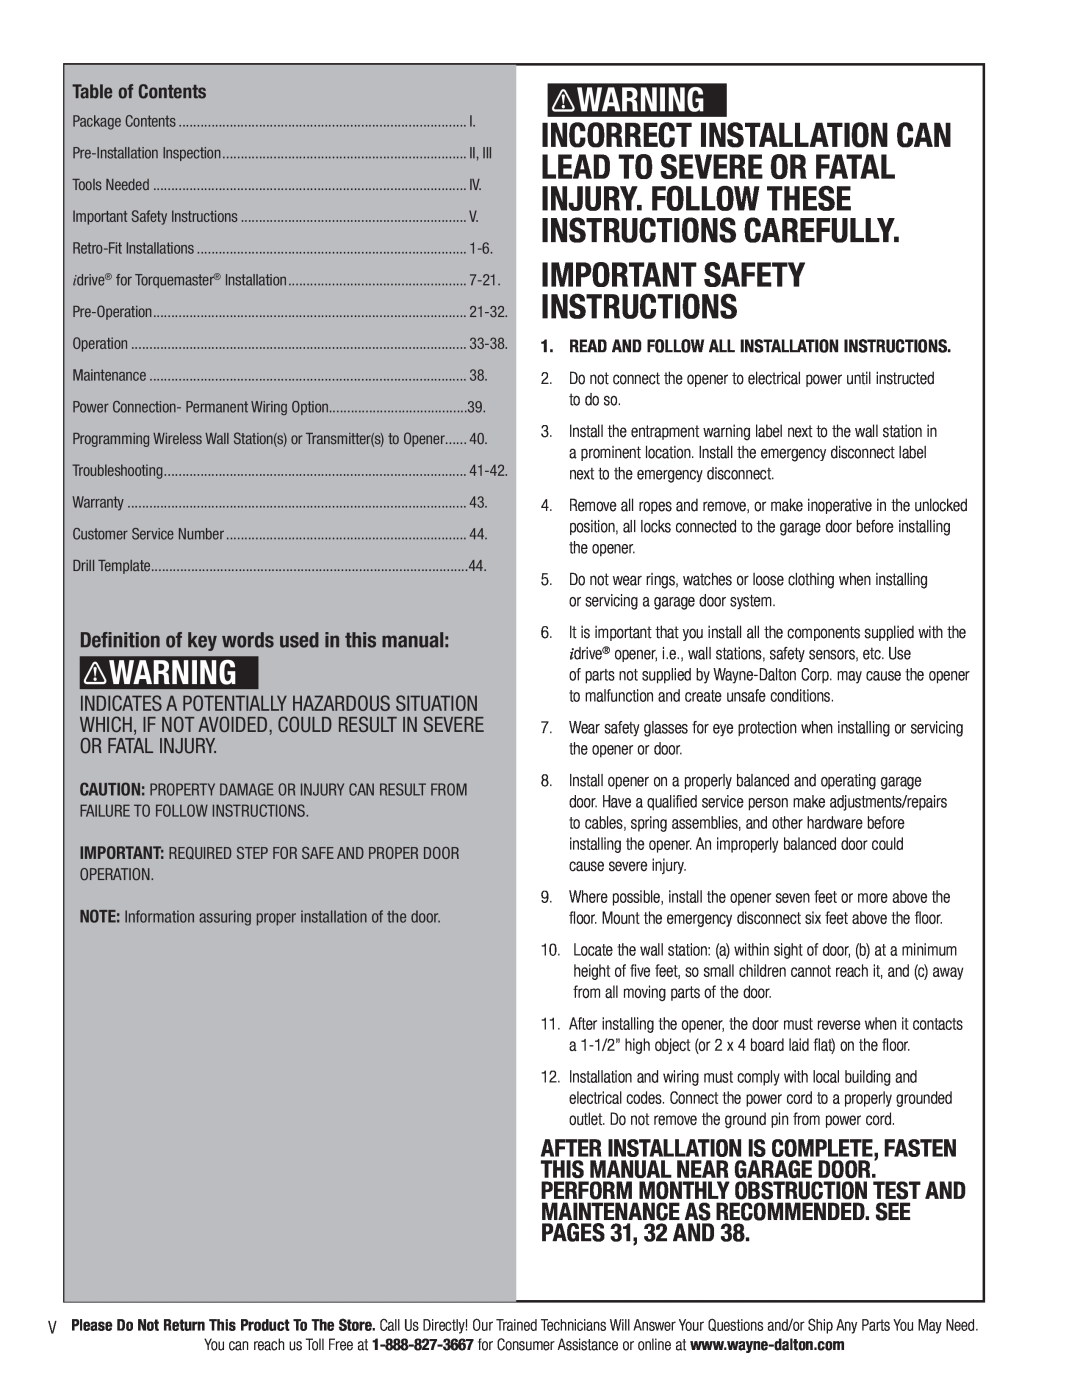 Wayne-Dalton 3790-Z installation instructions Important Safety Instructions, PAGES 31, 32 AND, Table of Contents 